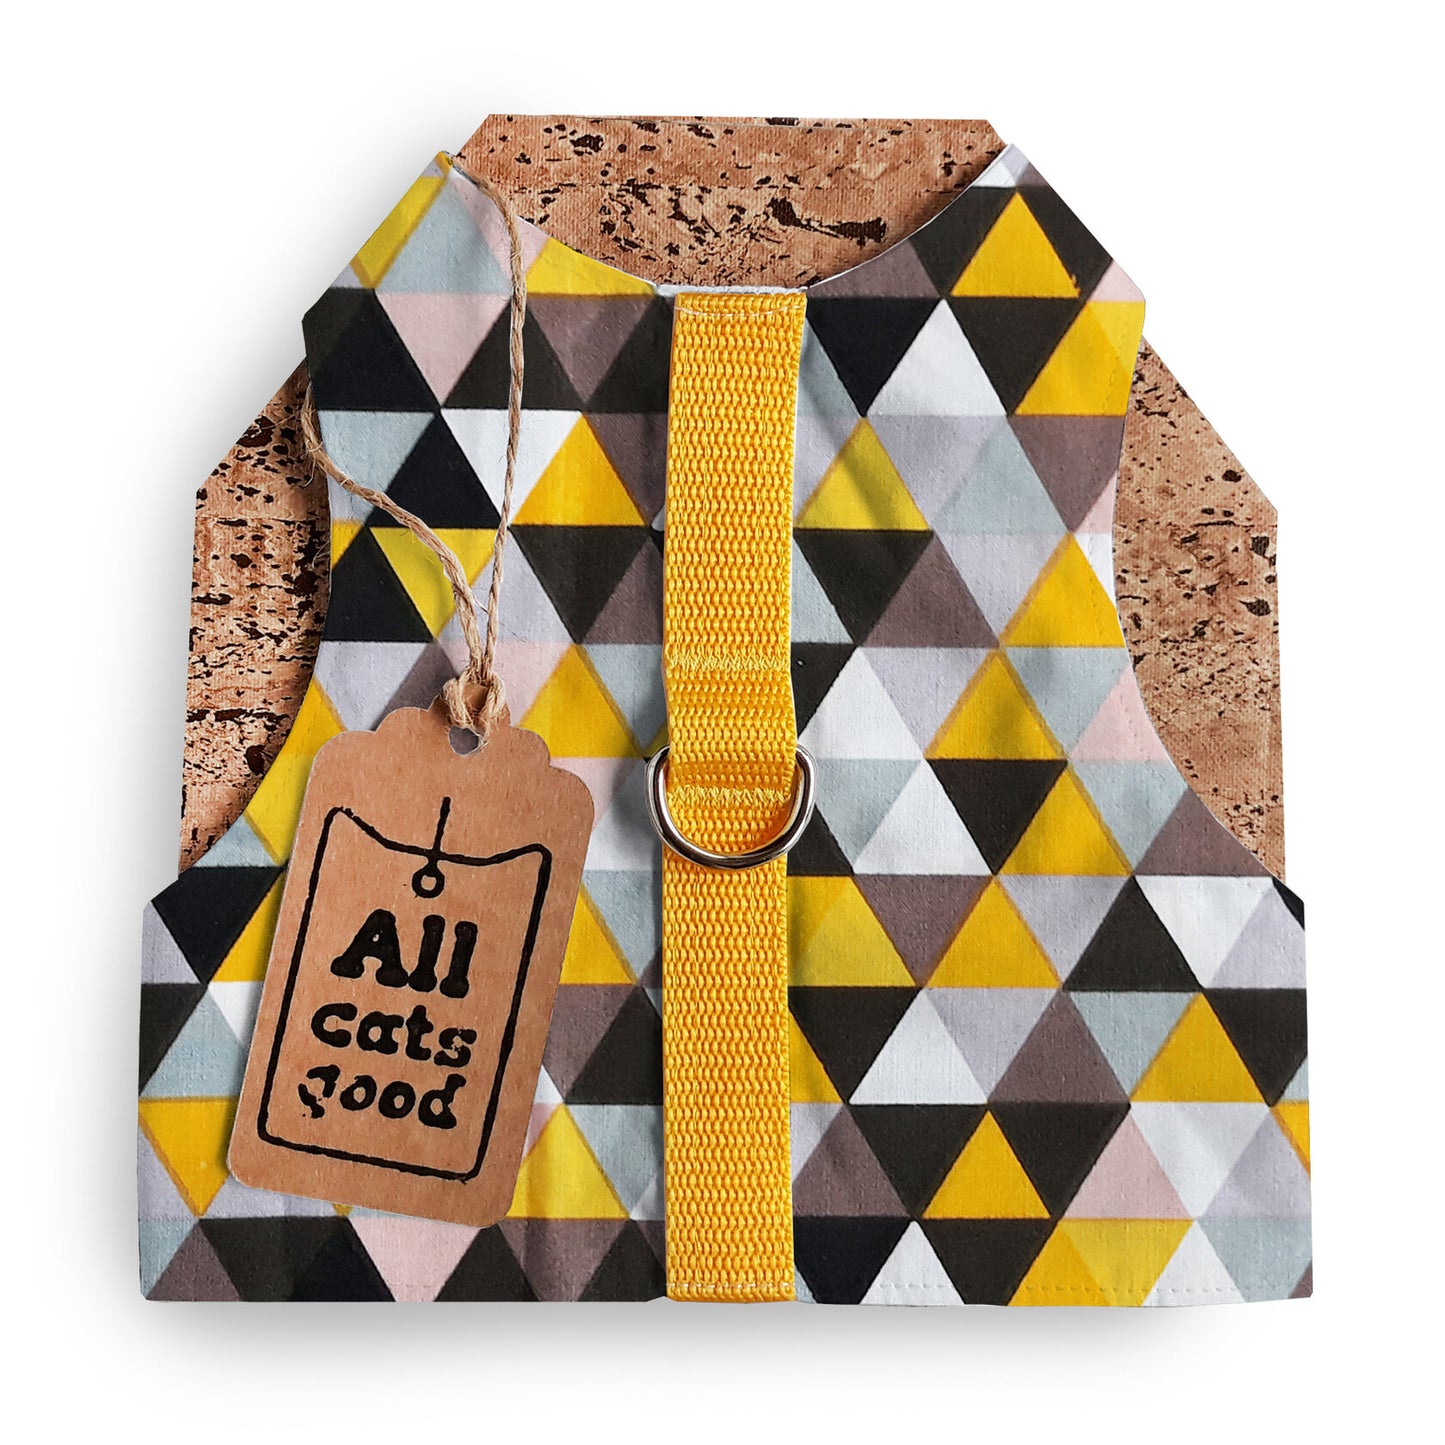 Difficult to escape and safety cat harness. Breathable cotton vest with yellow triangles print